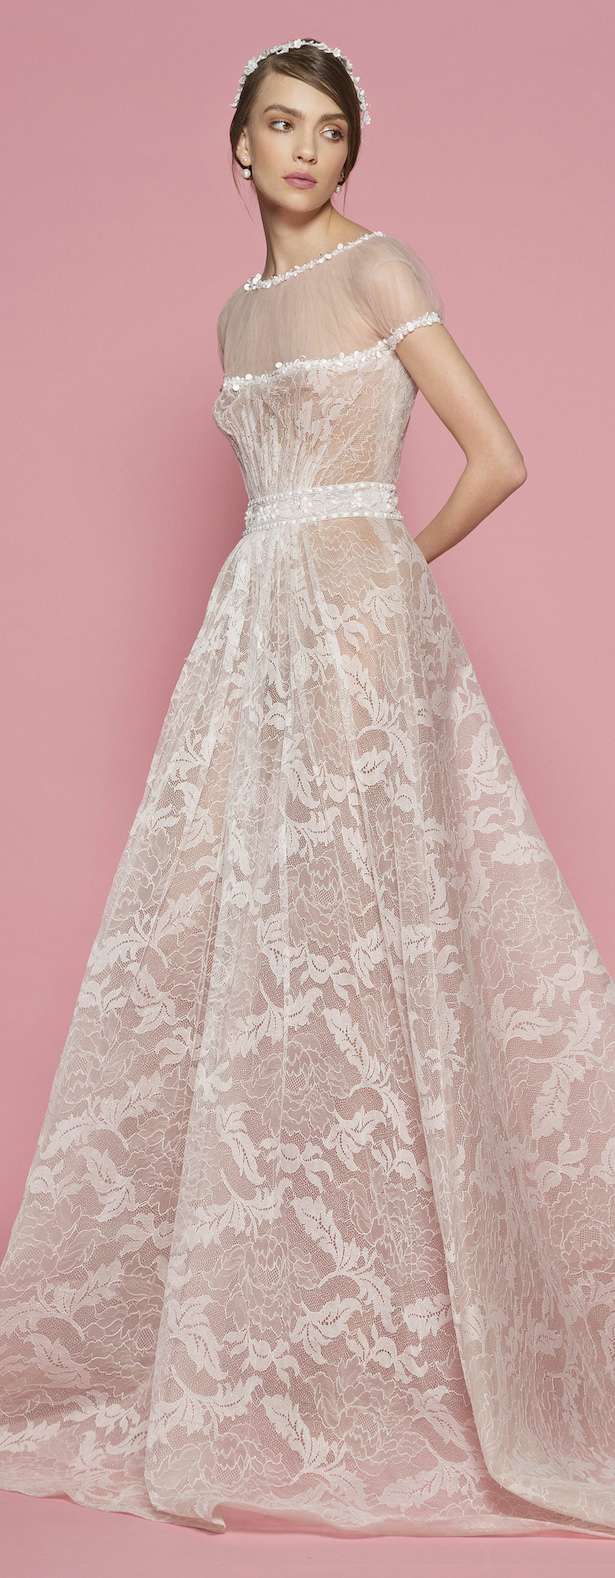 The 2018 Wedding Dress Collection by Georges Hobeika